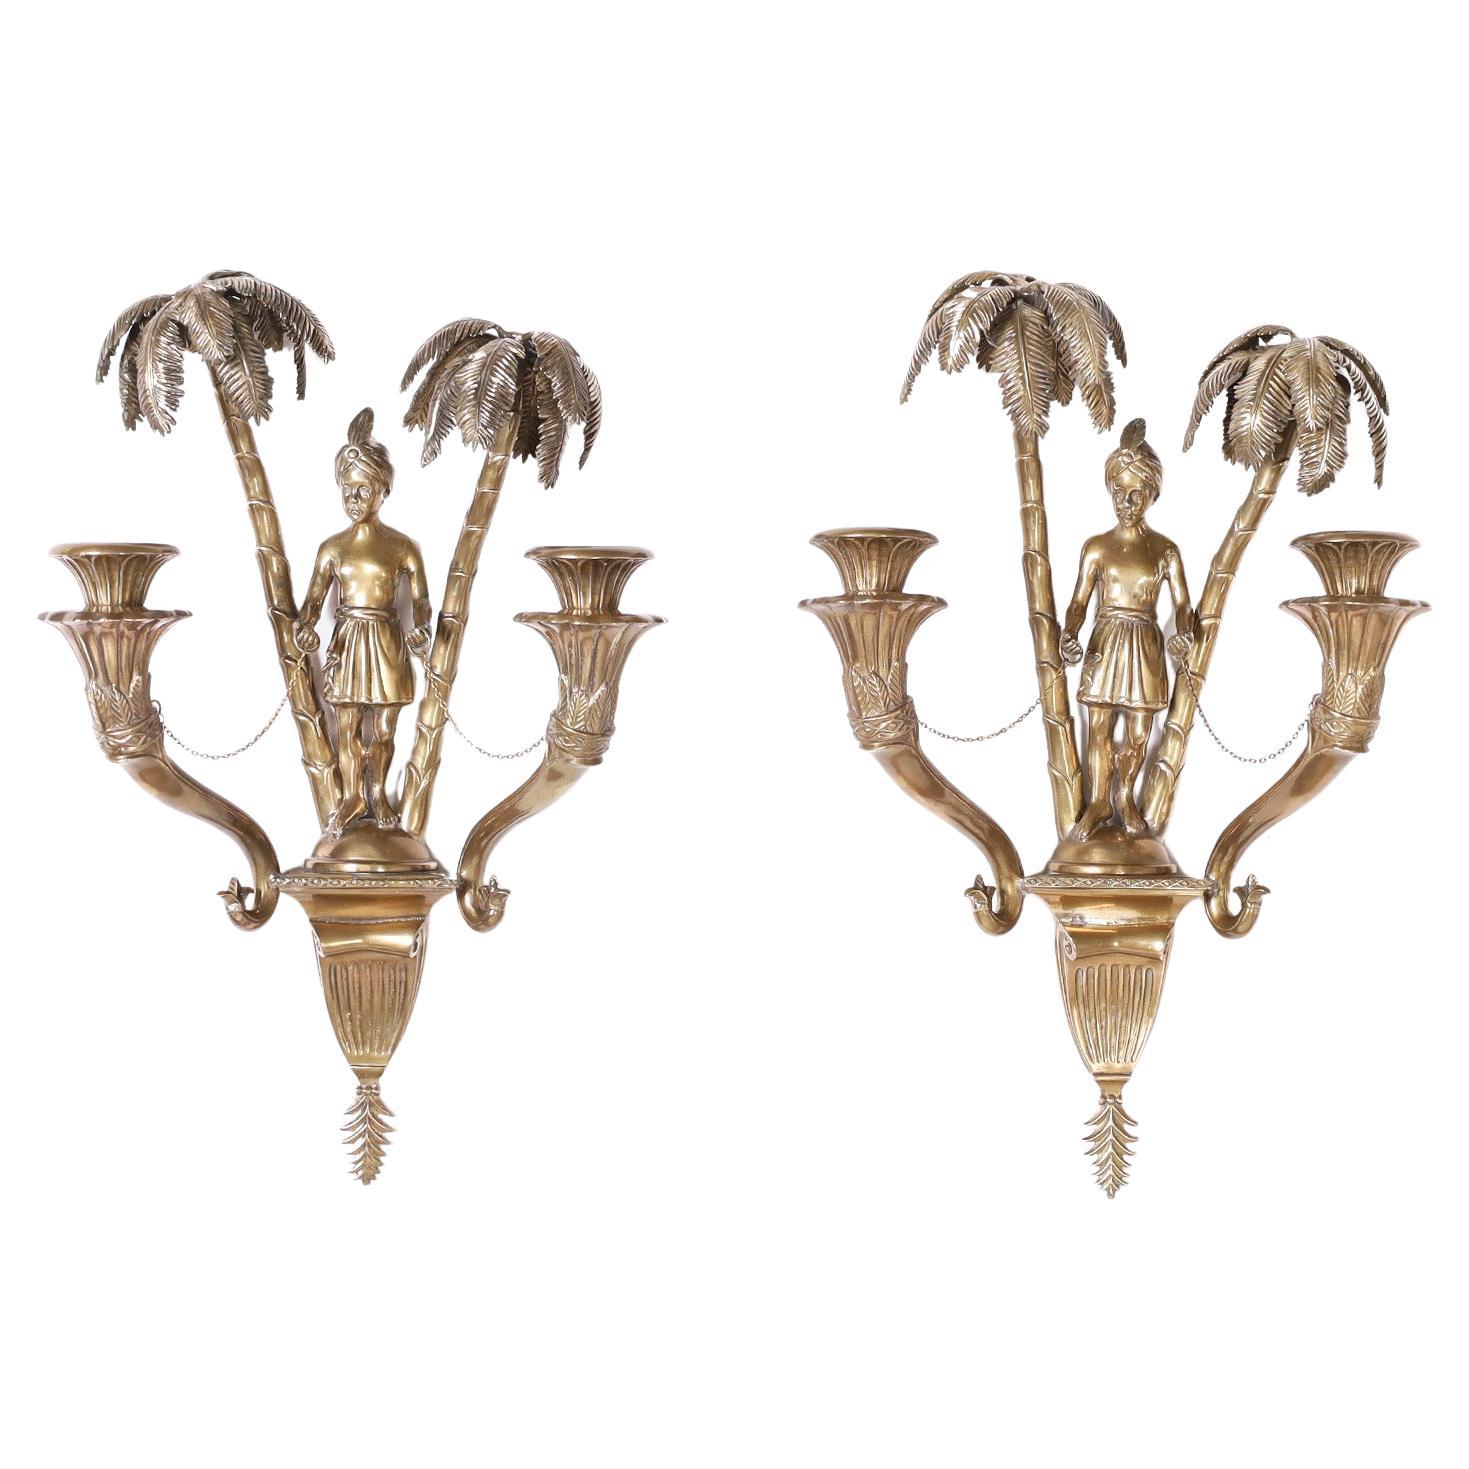 Antique French Orientalist Figural Wall Sconce Pair with Palm Trees For Sale